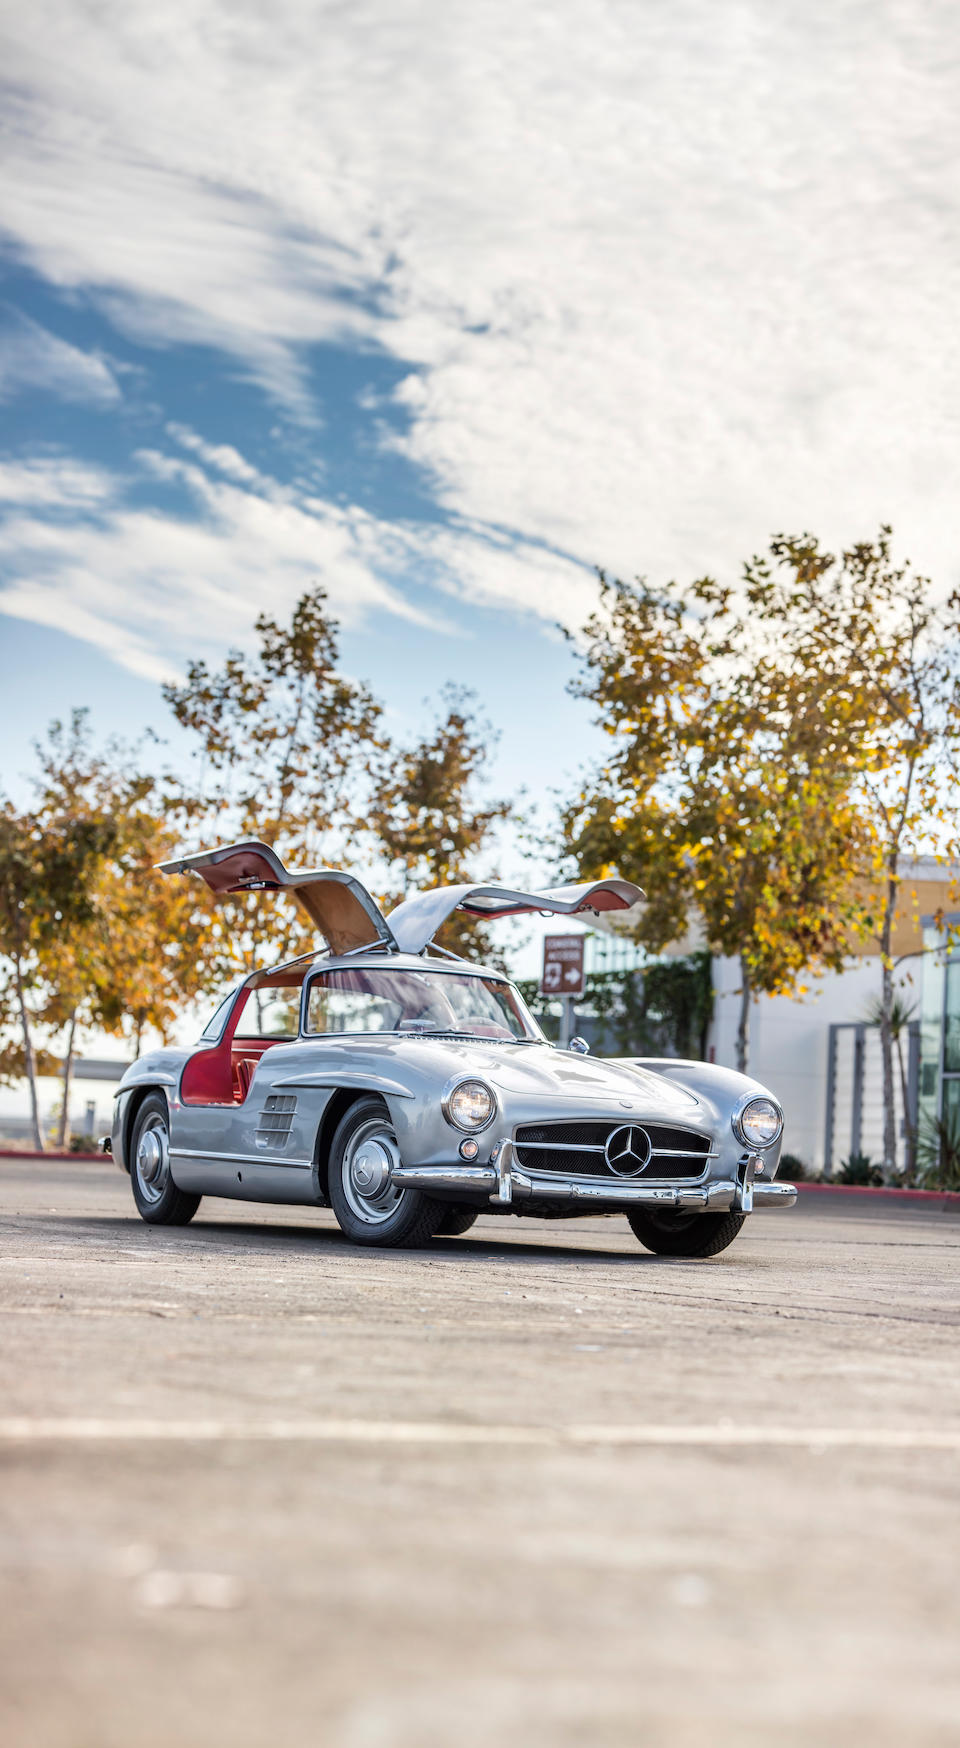 <b>1955 Mercedes-Benz 300SL Gullwing Coupe</b><br />Chassis no. 198.040.5500548<br />Engine no. 198.980.5500575